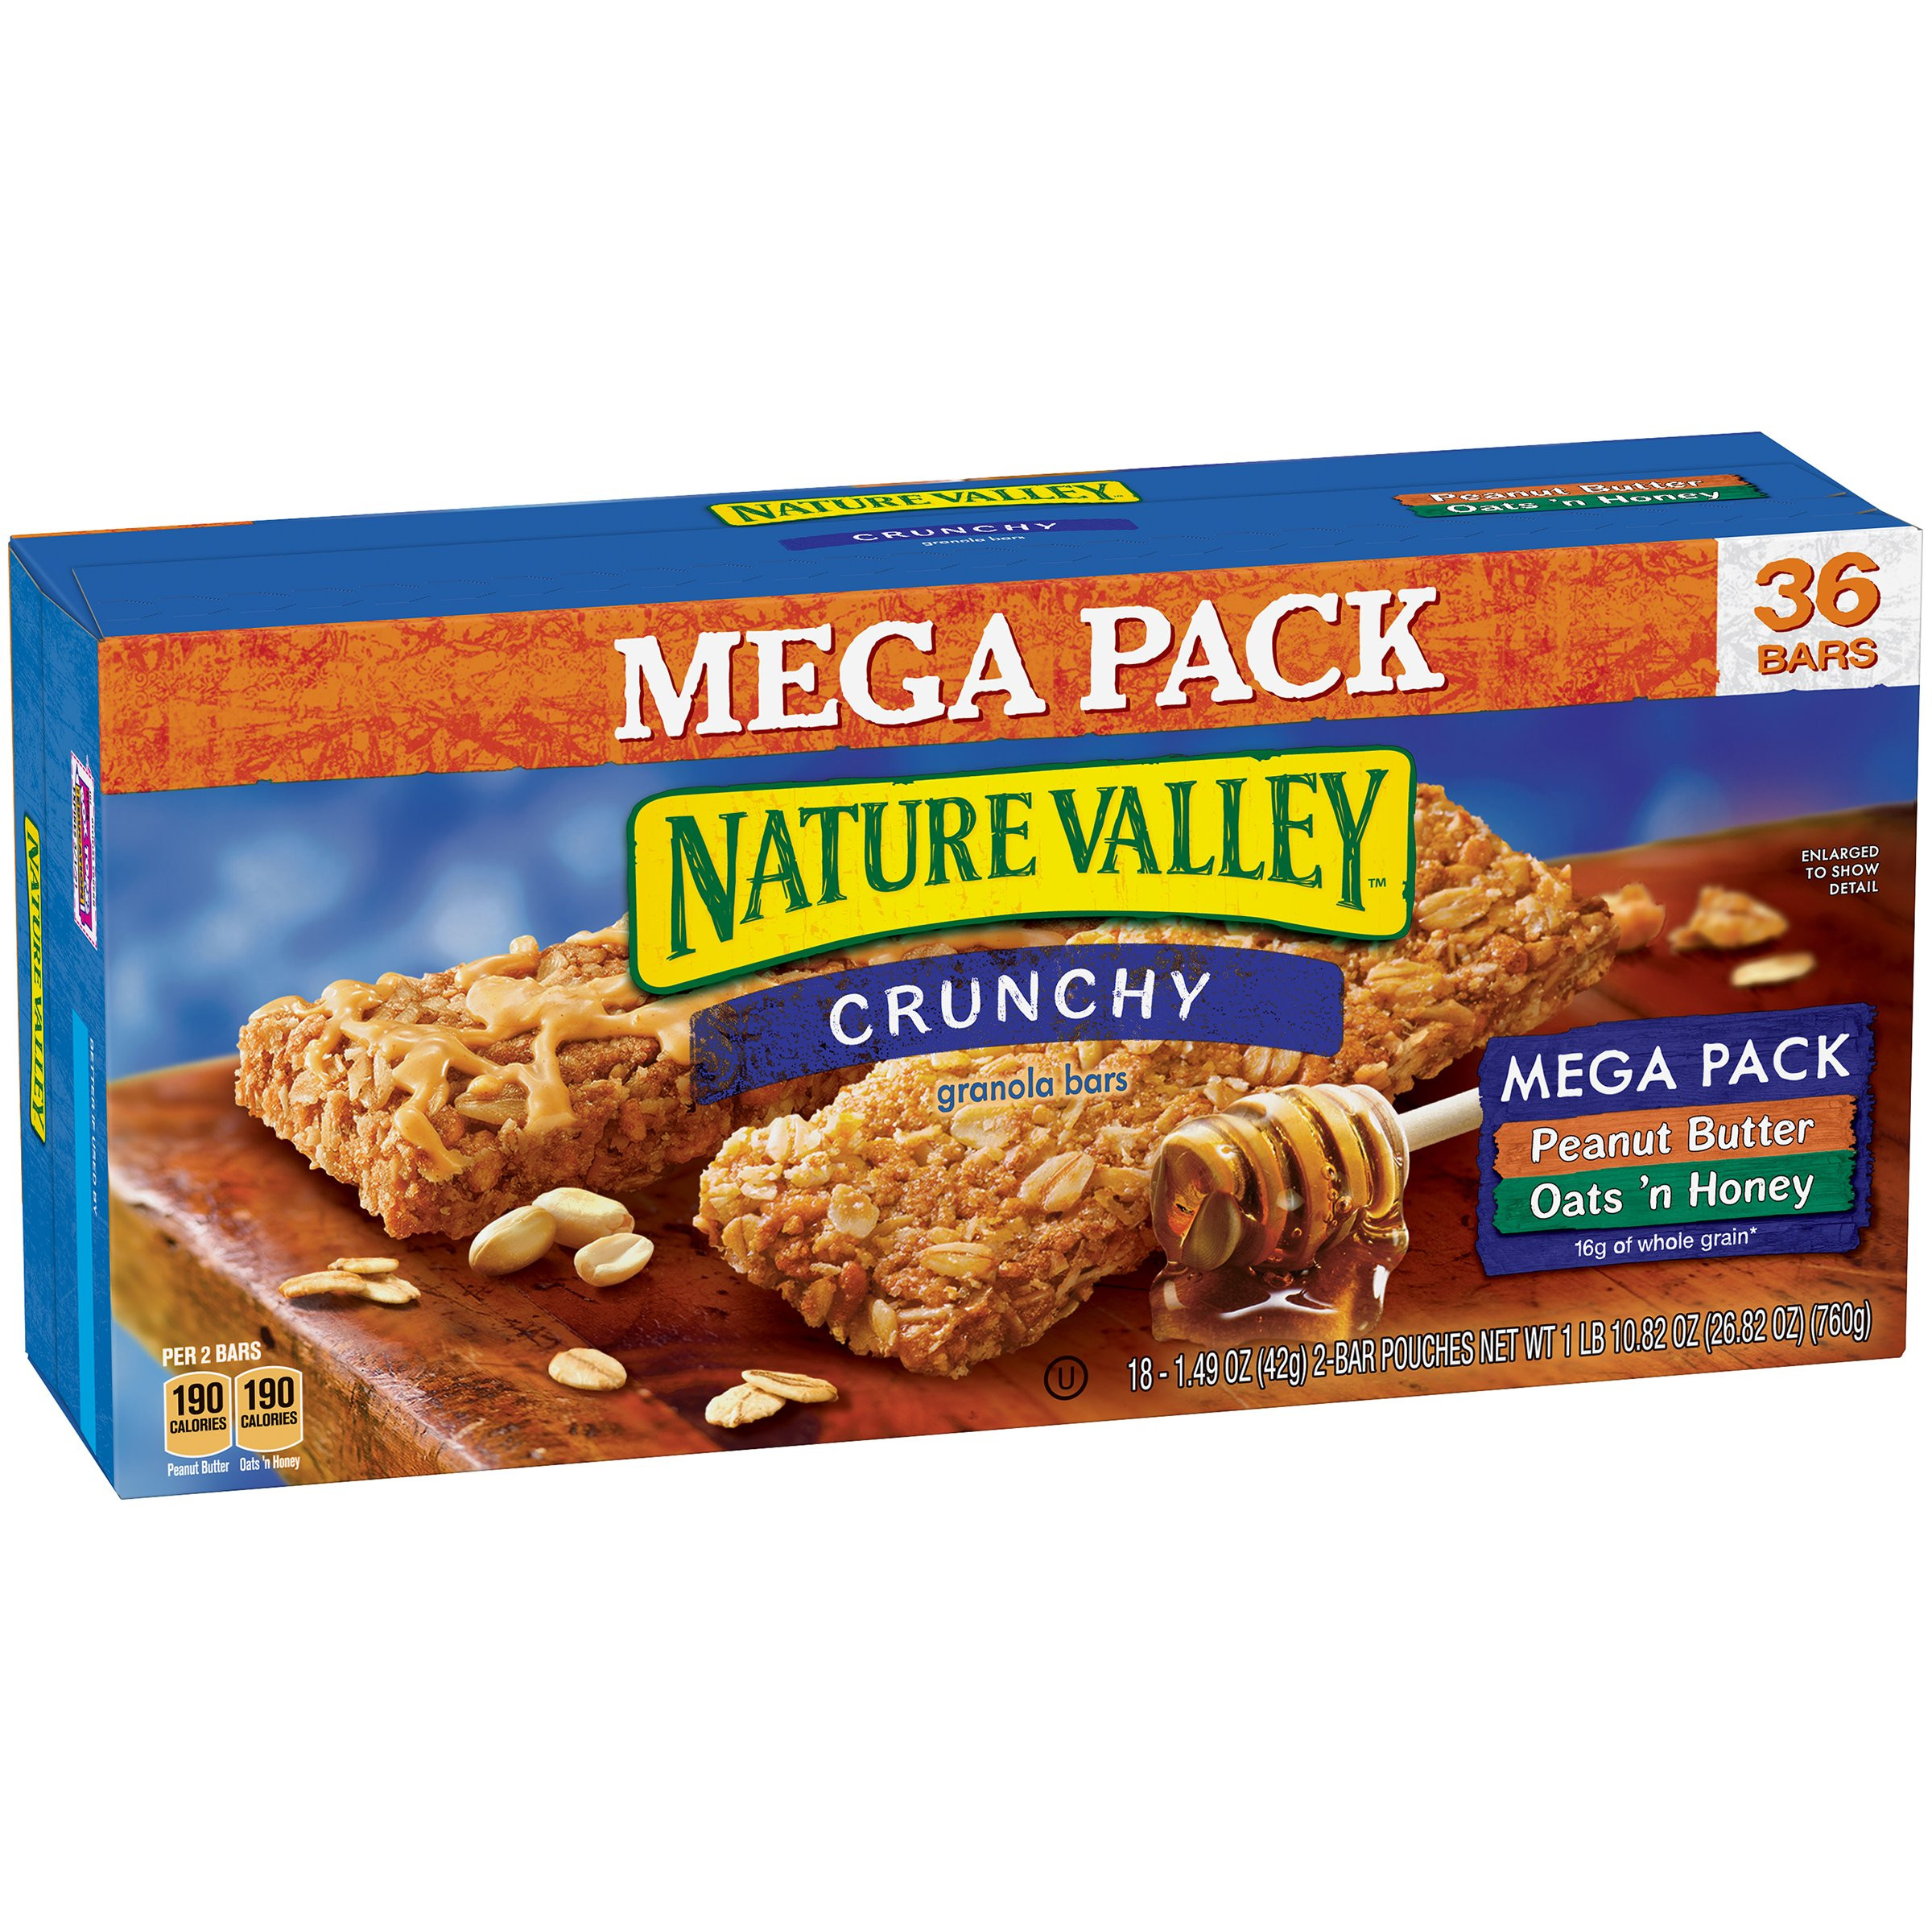 Nature Valley Oats And Honey Gluten Free
 Amazon Nature Valley Oats n Honey Crunchy Granola